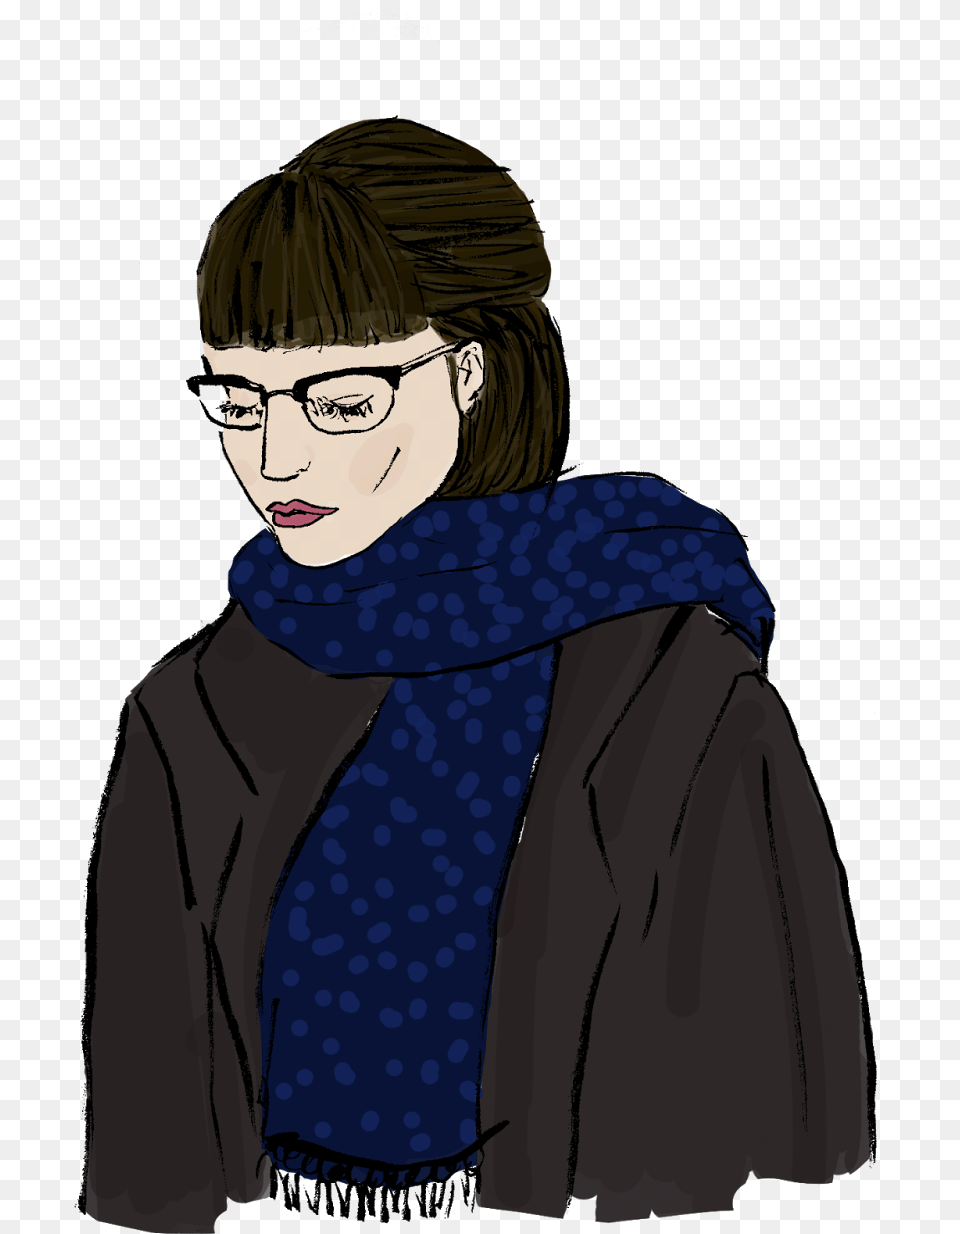 Scarf, Woman, Person, Female, Adult Png